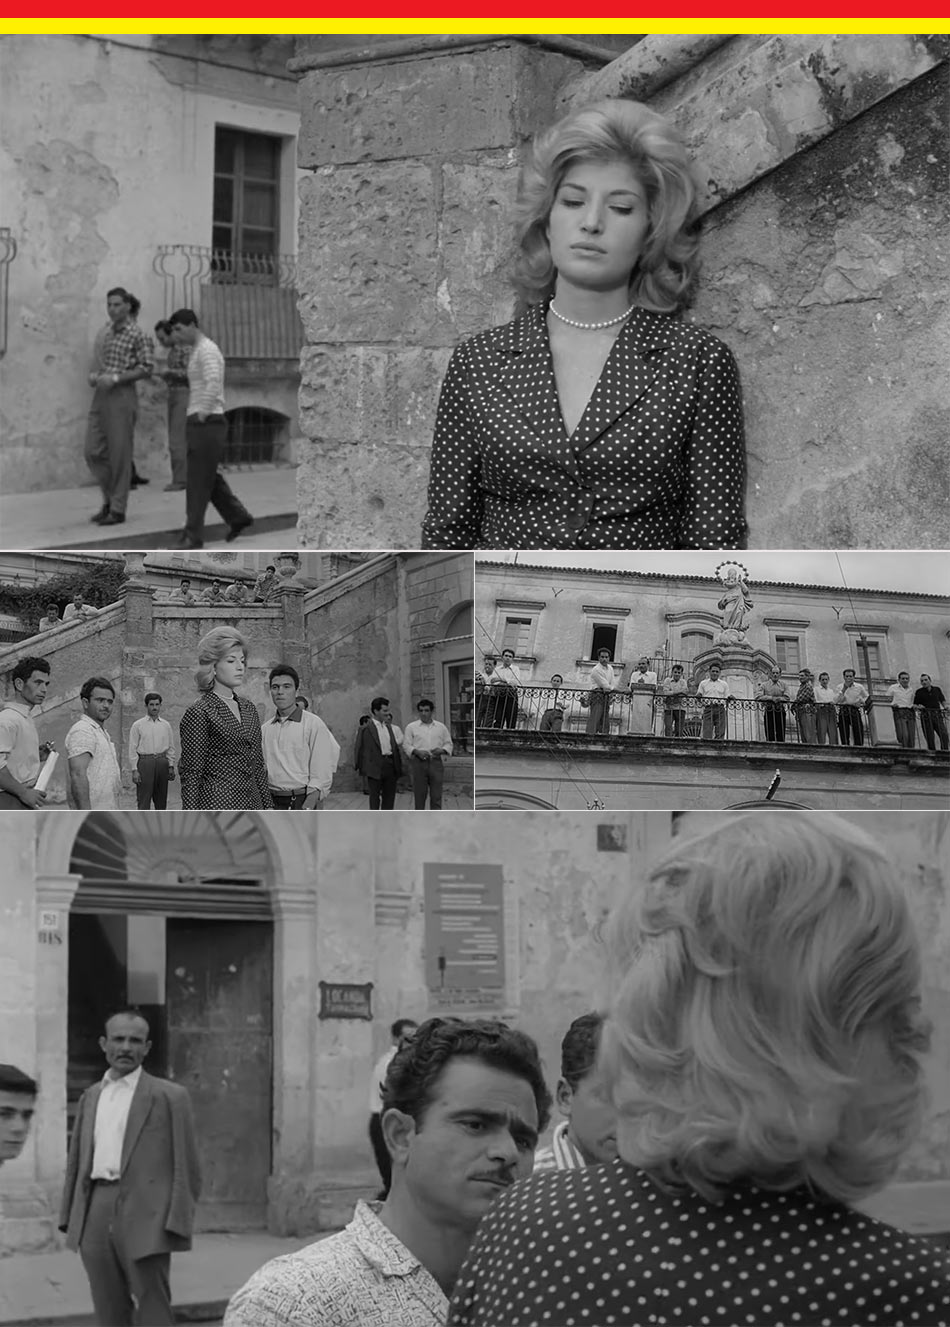 Claudia (Monica Vitti) is surrounded by men as she is waiting for Sandro (Gabriele Ferzetti) by the steps of Chiesa di San Francesco d'Assisi all'Immacolata, Noto